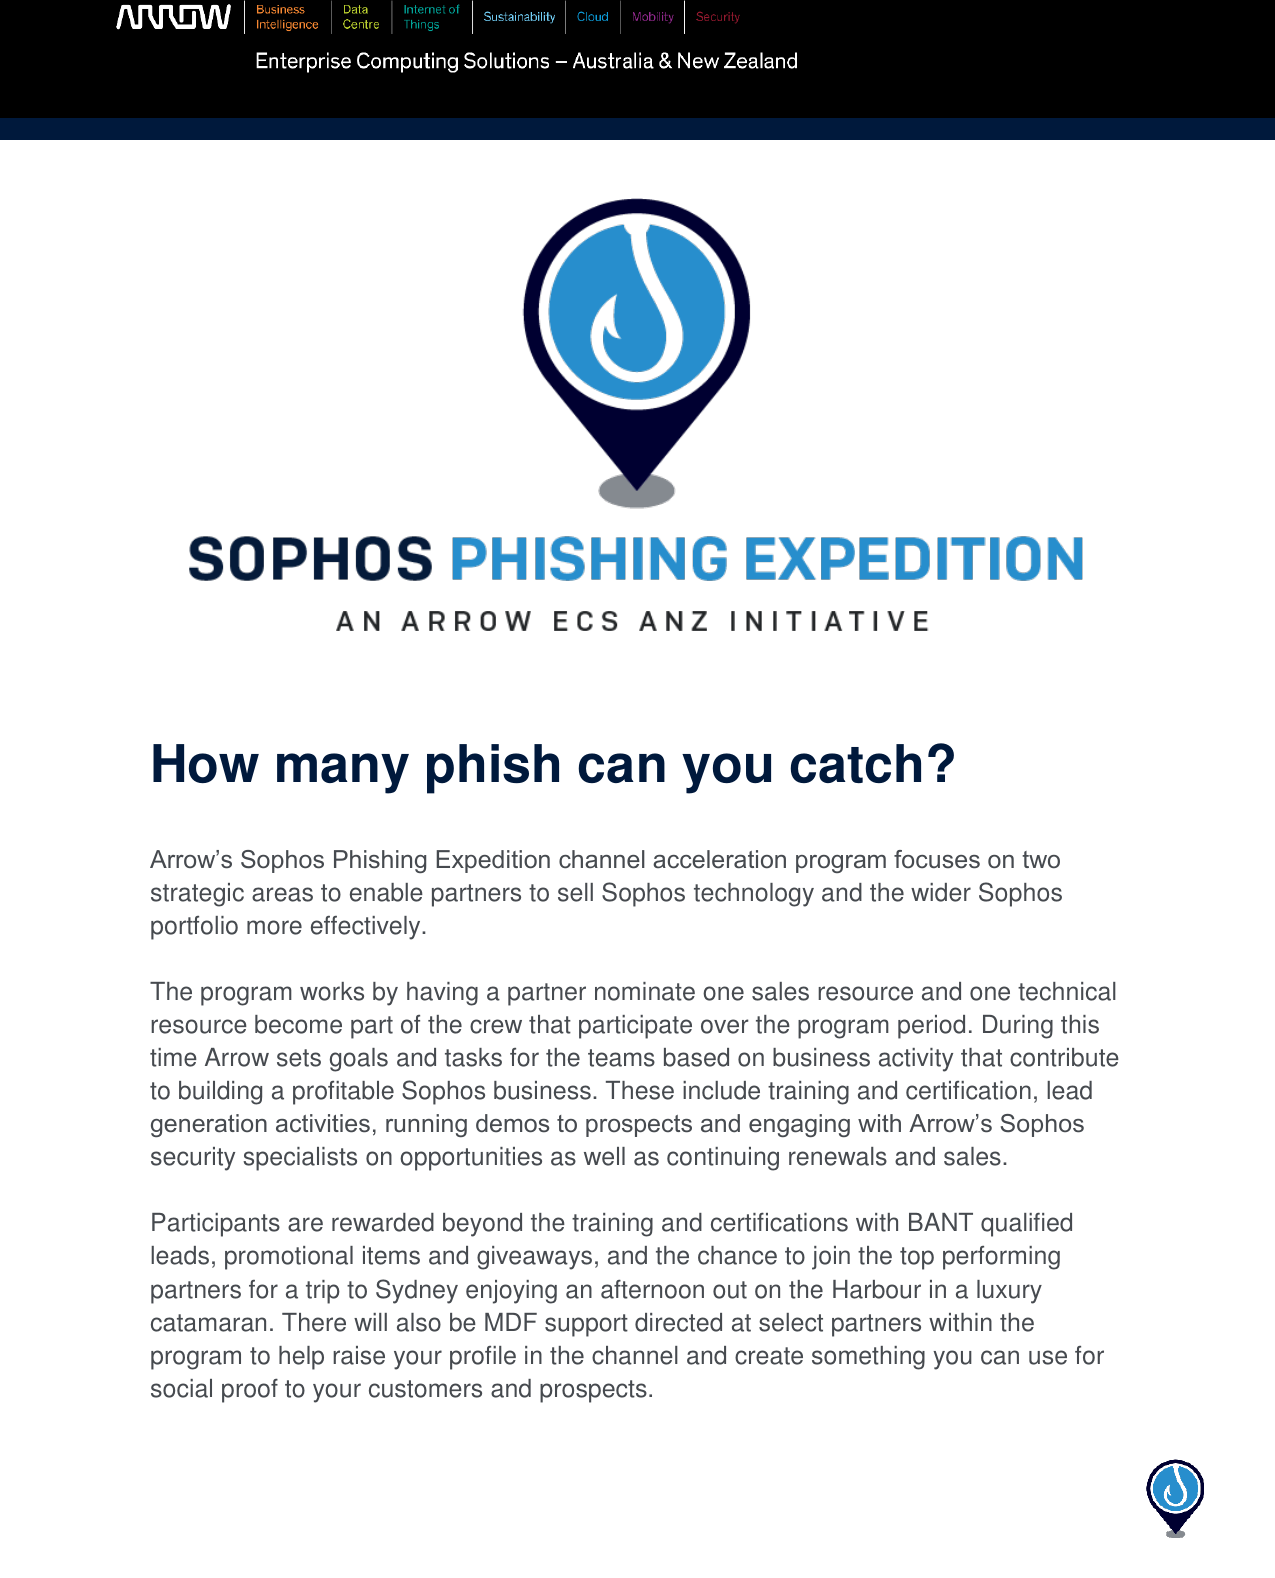 Page 1 of 6 - Sophos-Phishing-Expedition Program-Overview